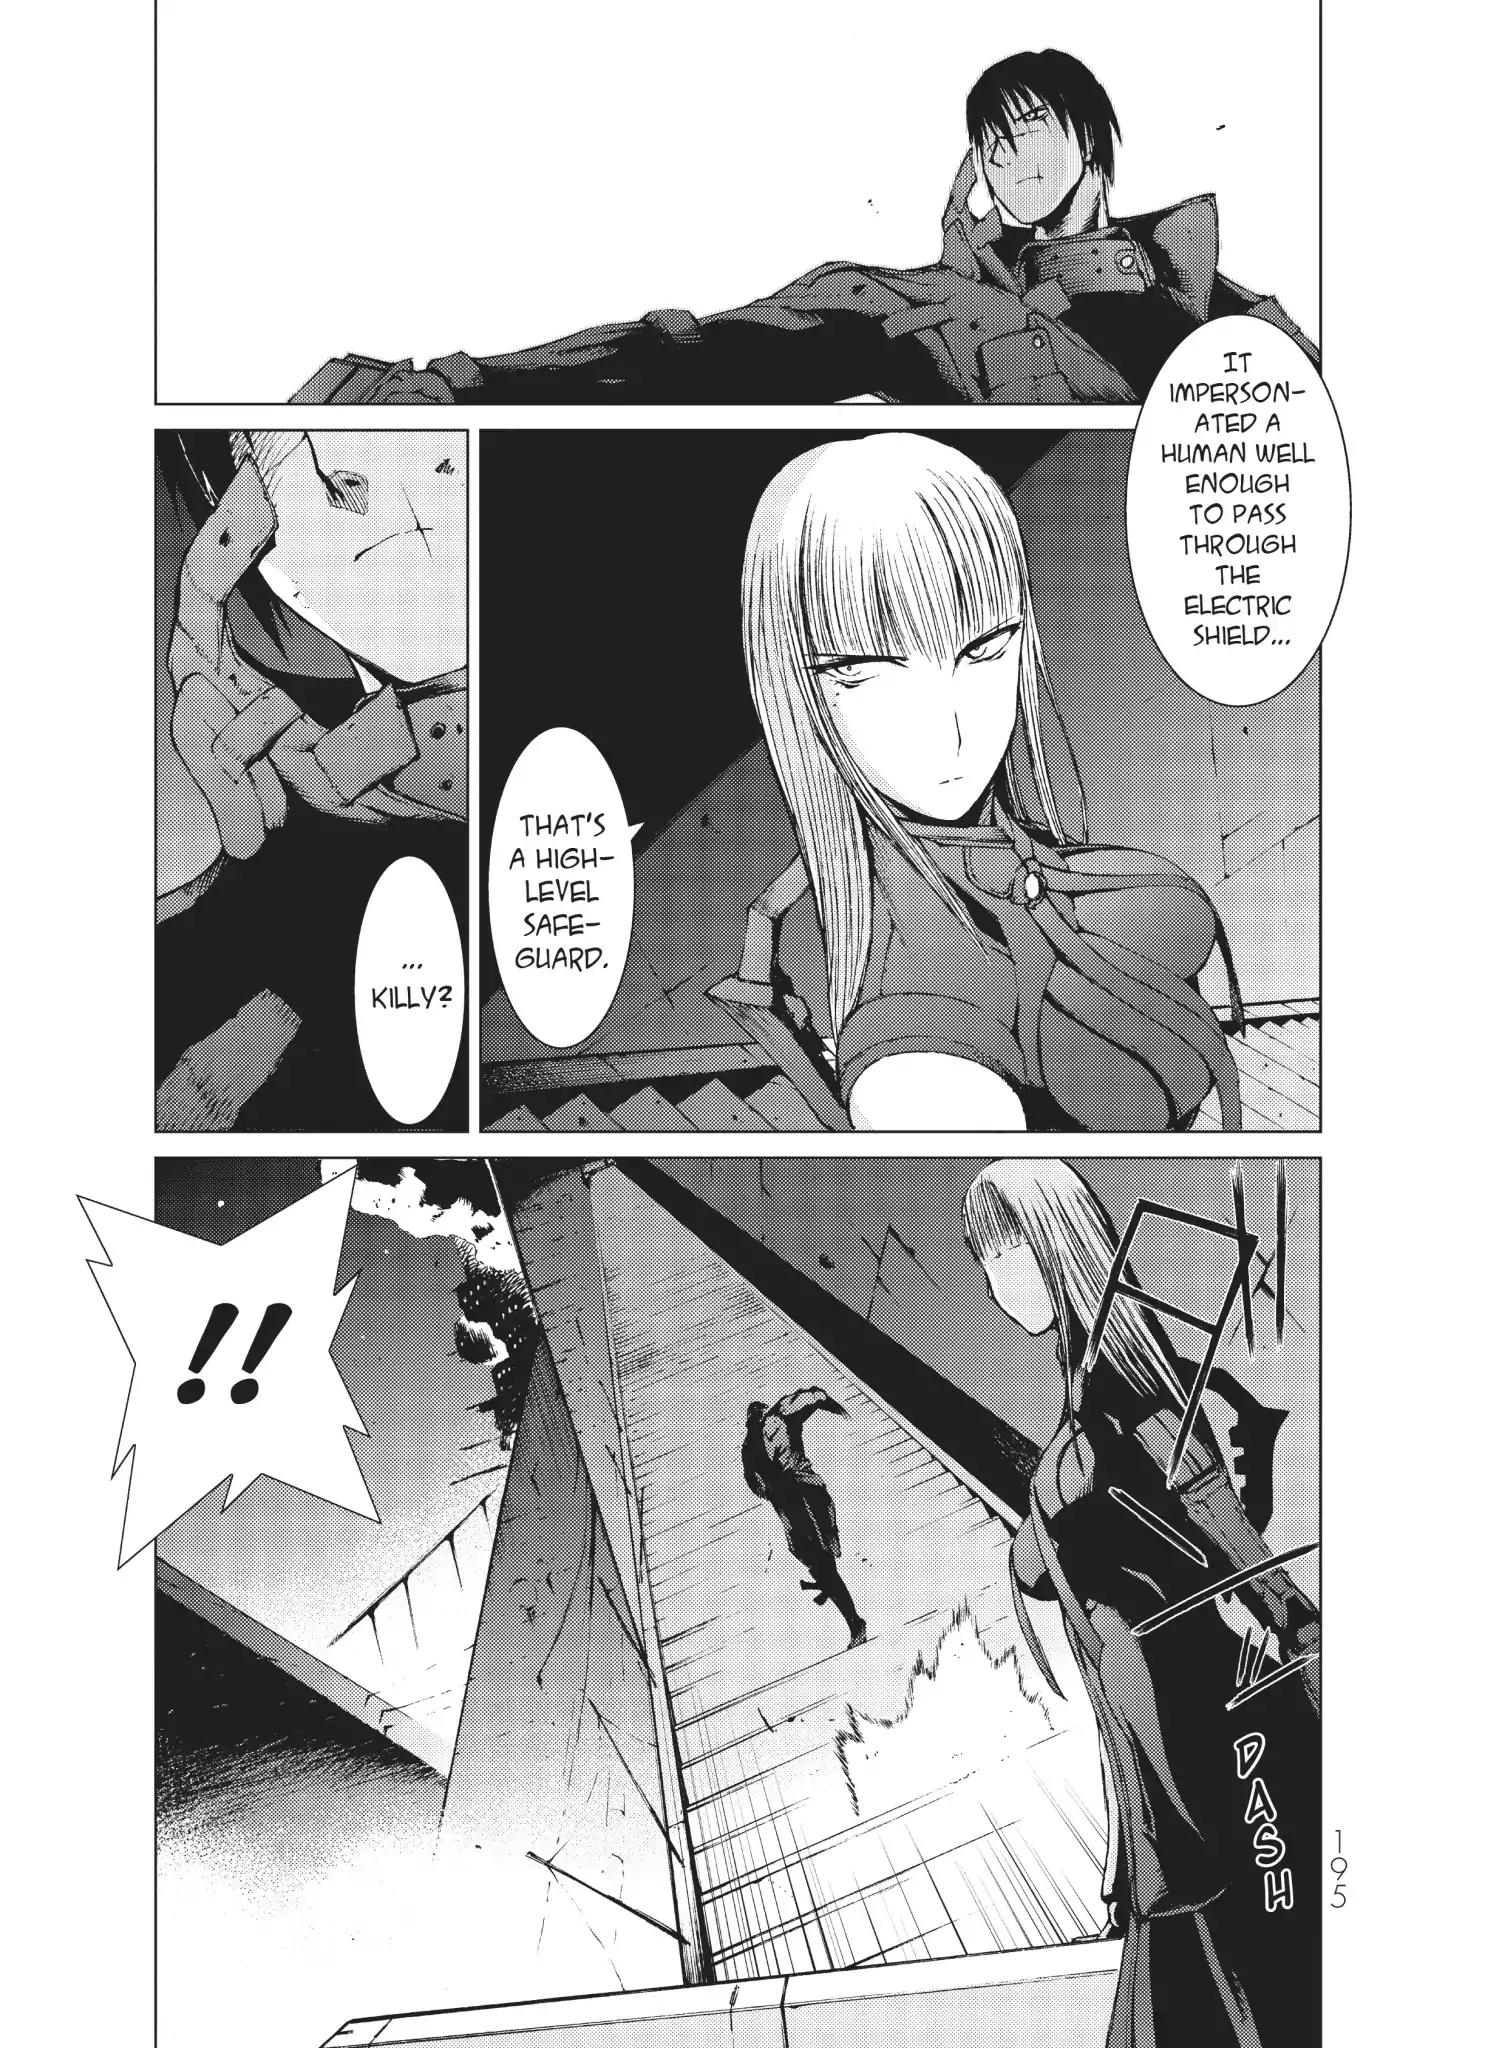 Blame! Movie Edition : The Electrofishers' Escape LOG.6: